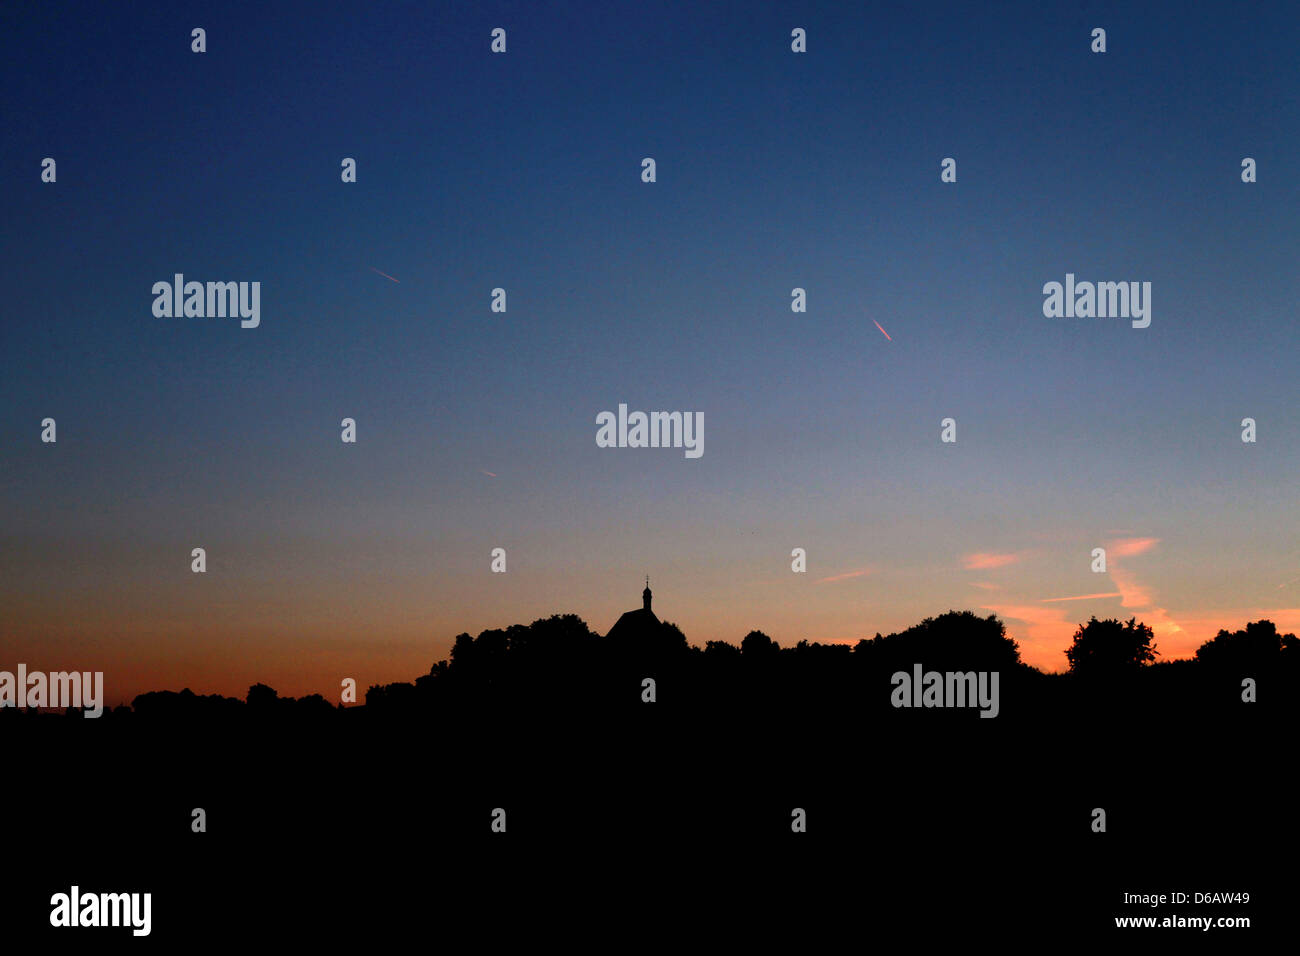 Page 2 - 08 August 2012 High Resolution Stock Photography and Images - Alamy